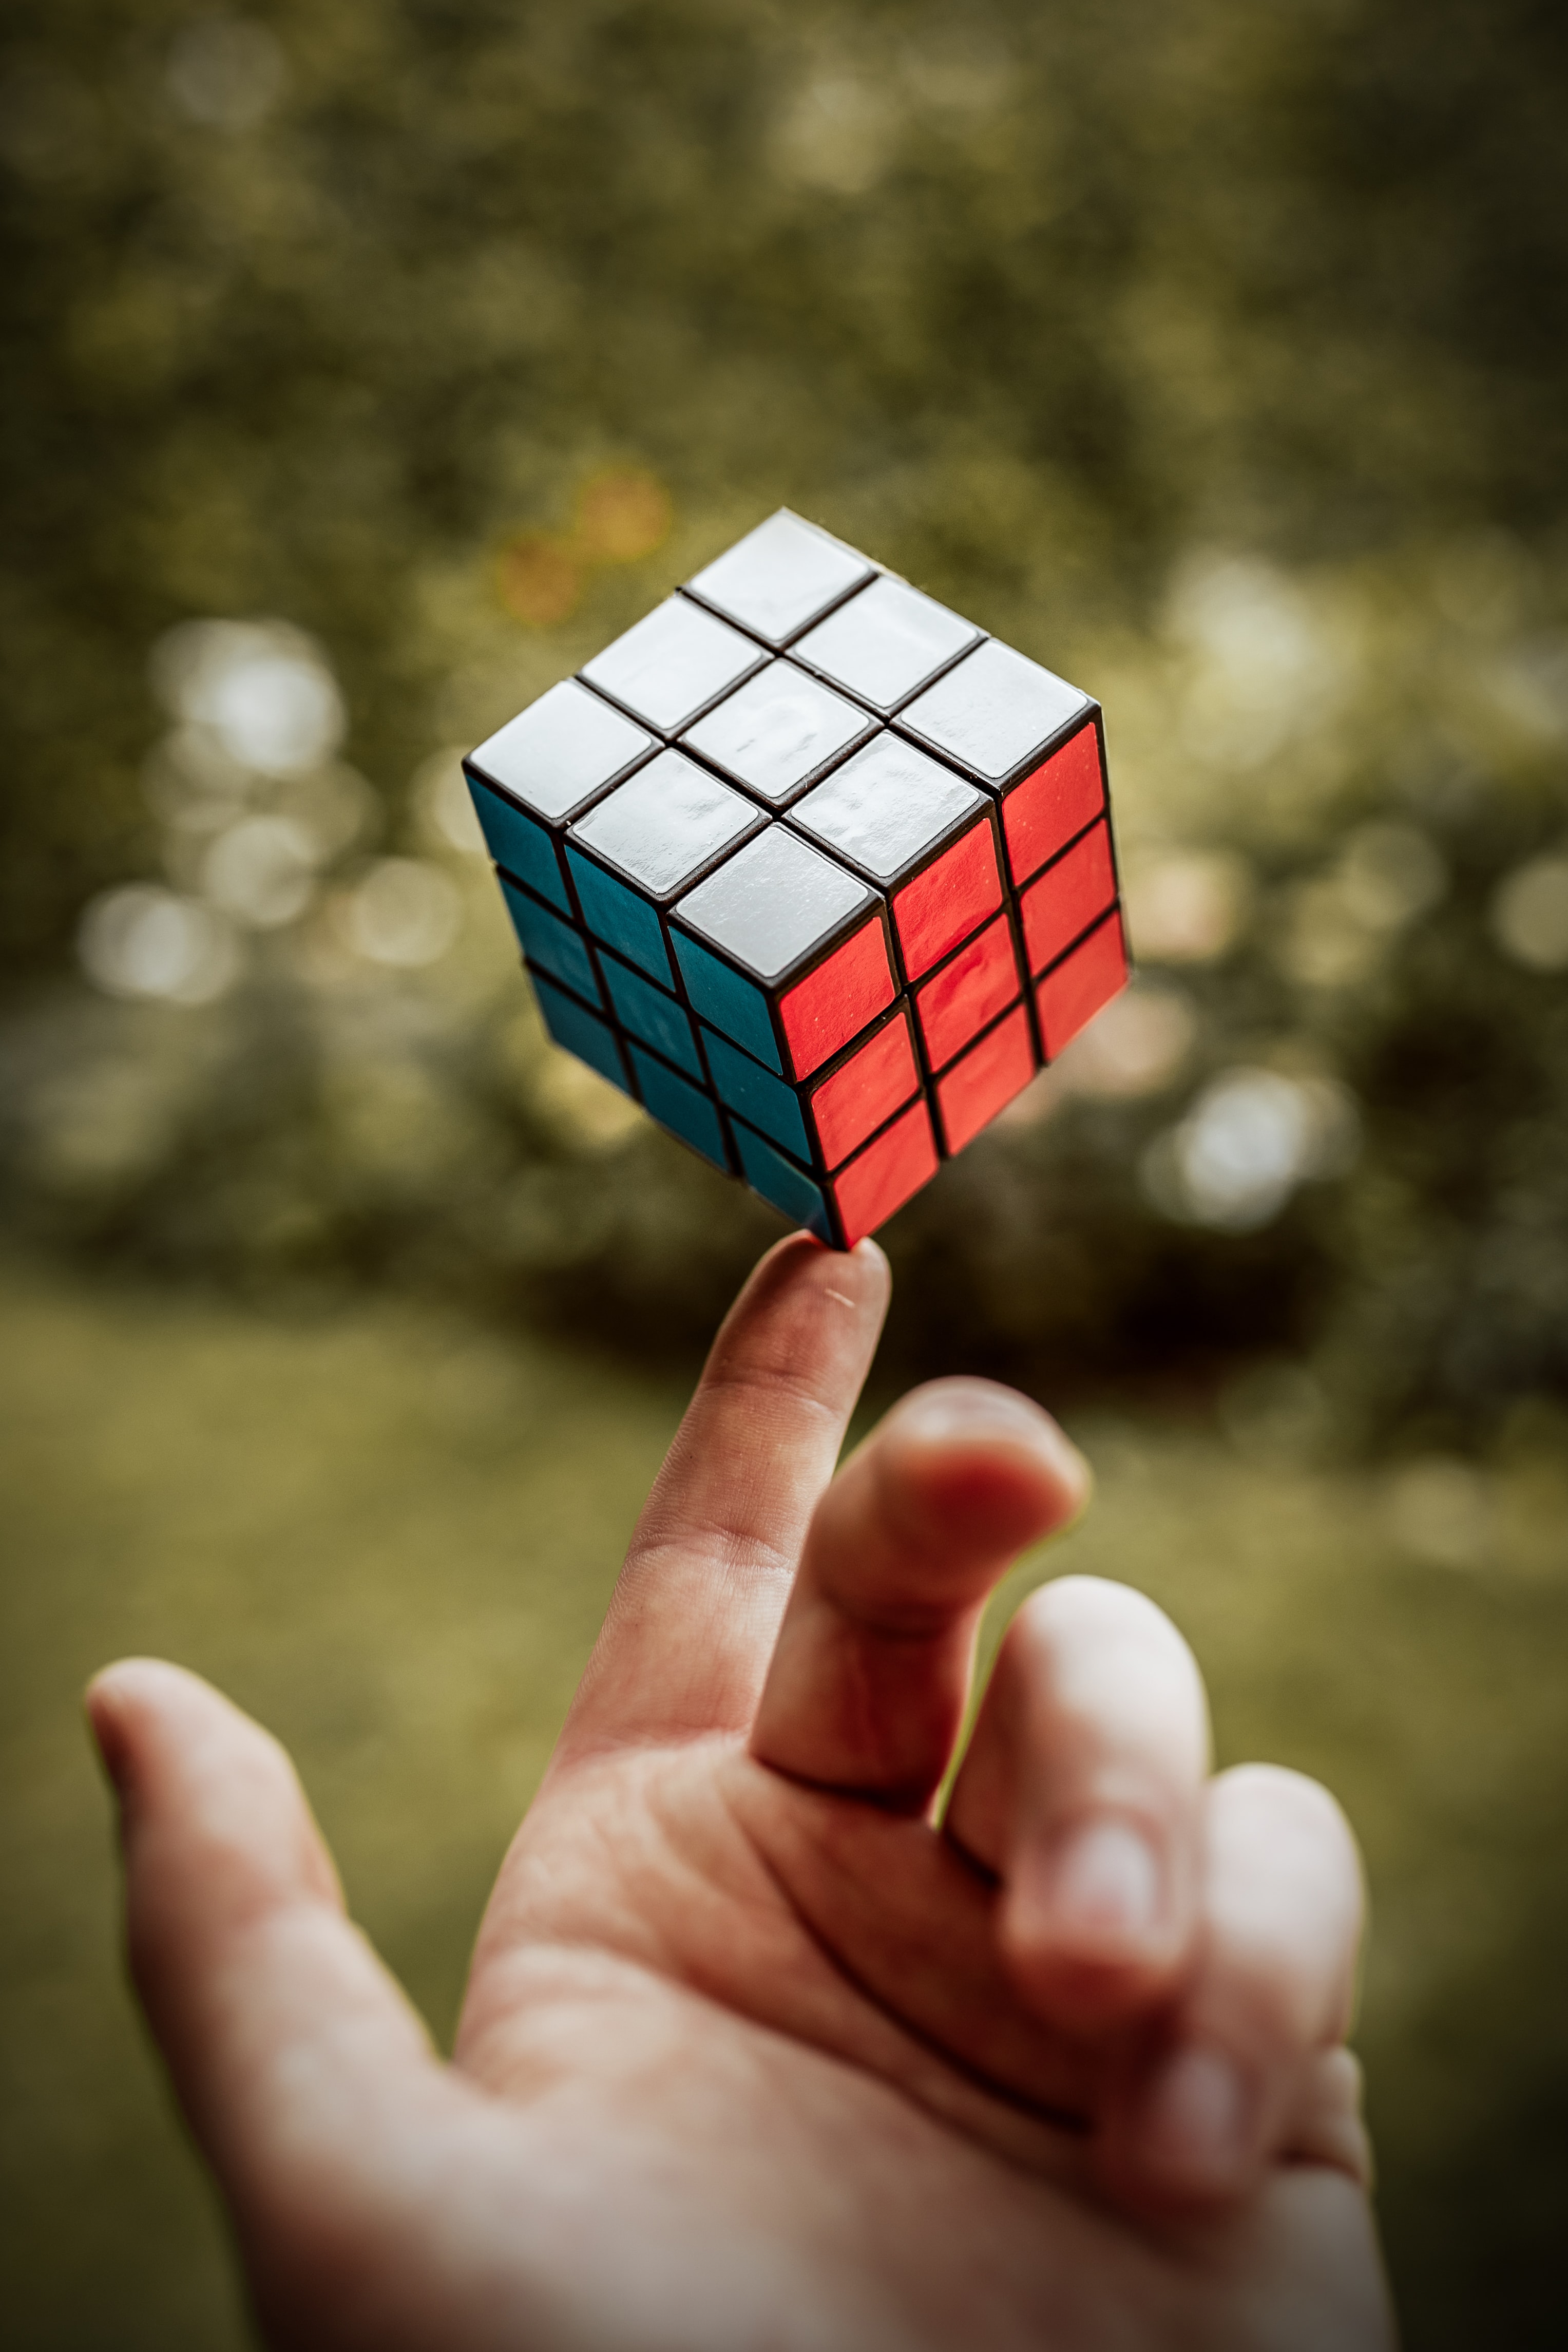 rubik's cube, miscellaneous, hand, miscellanea, fingers, touch, touching Full HD